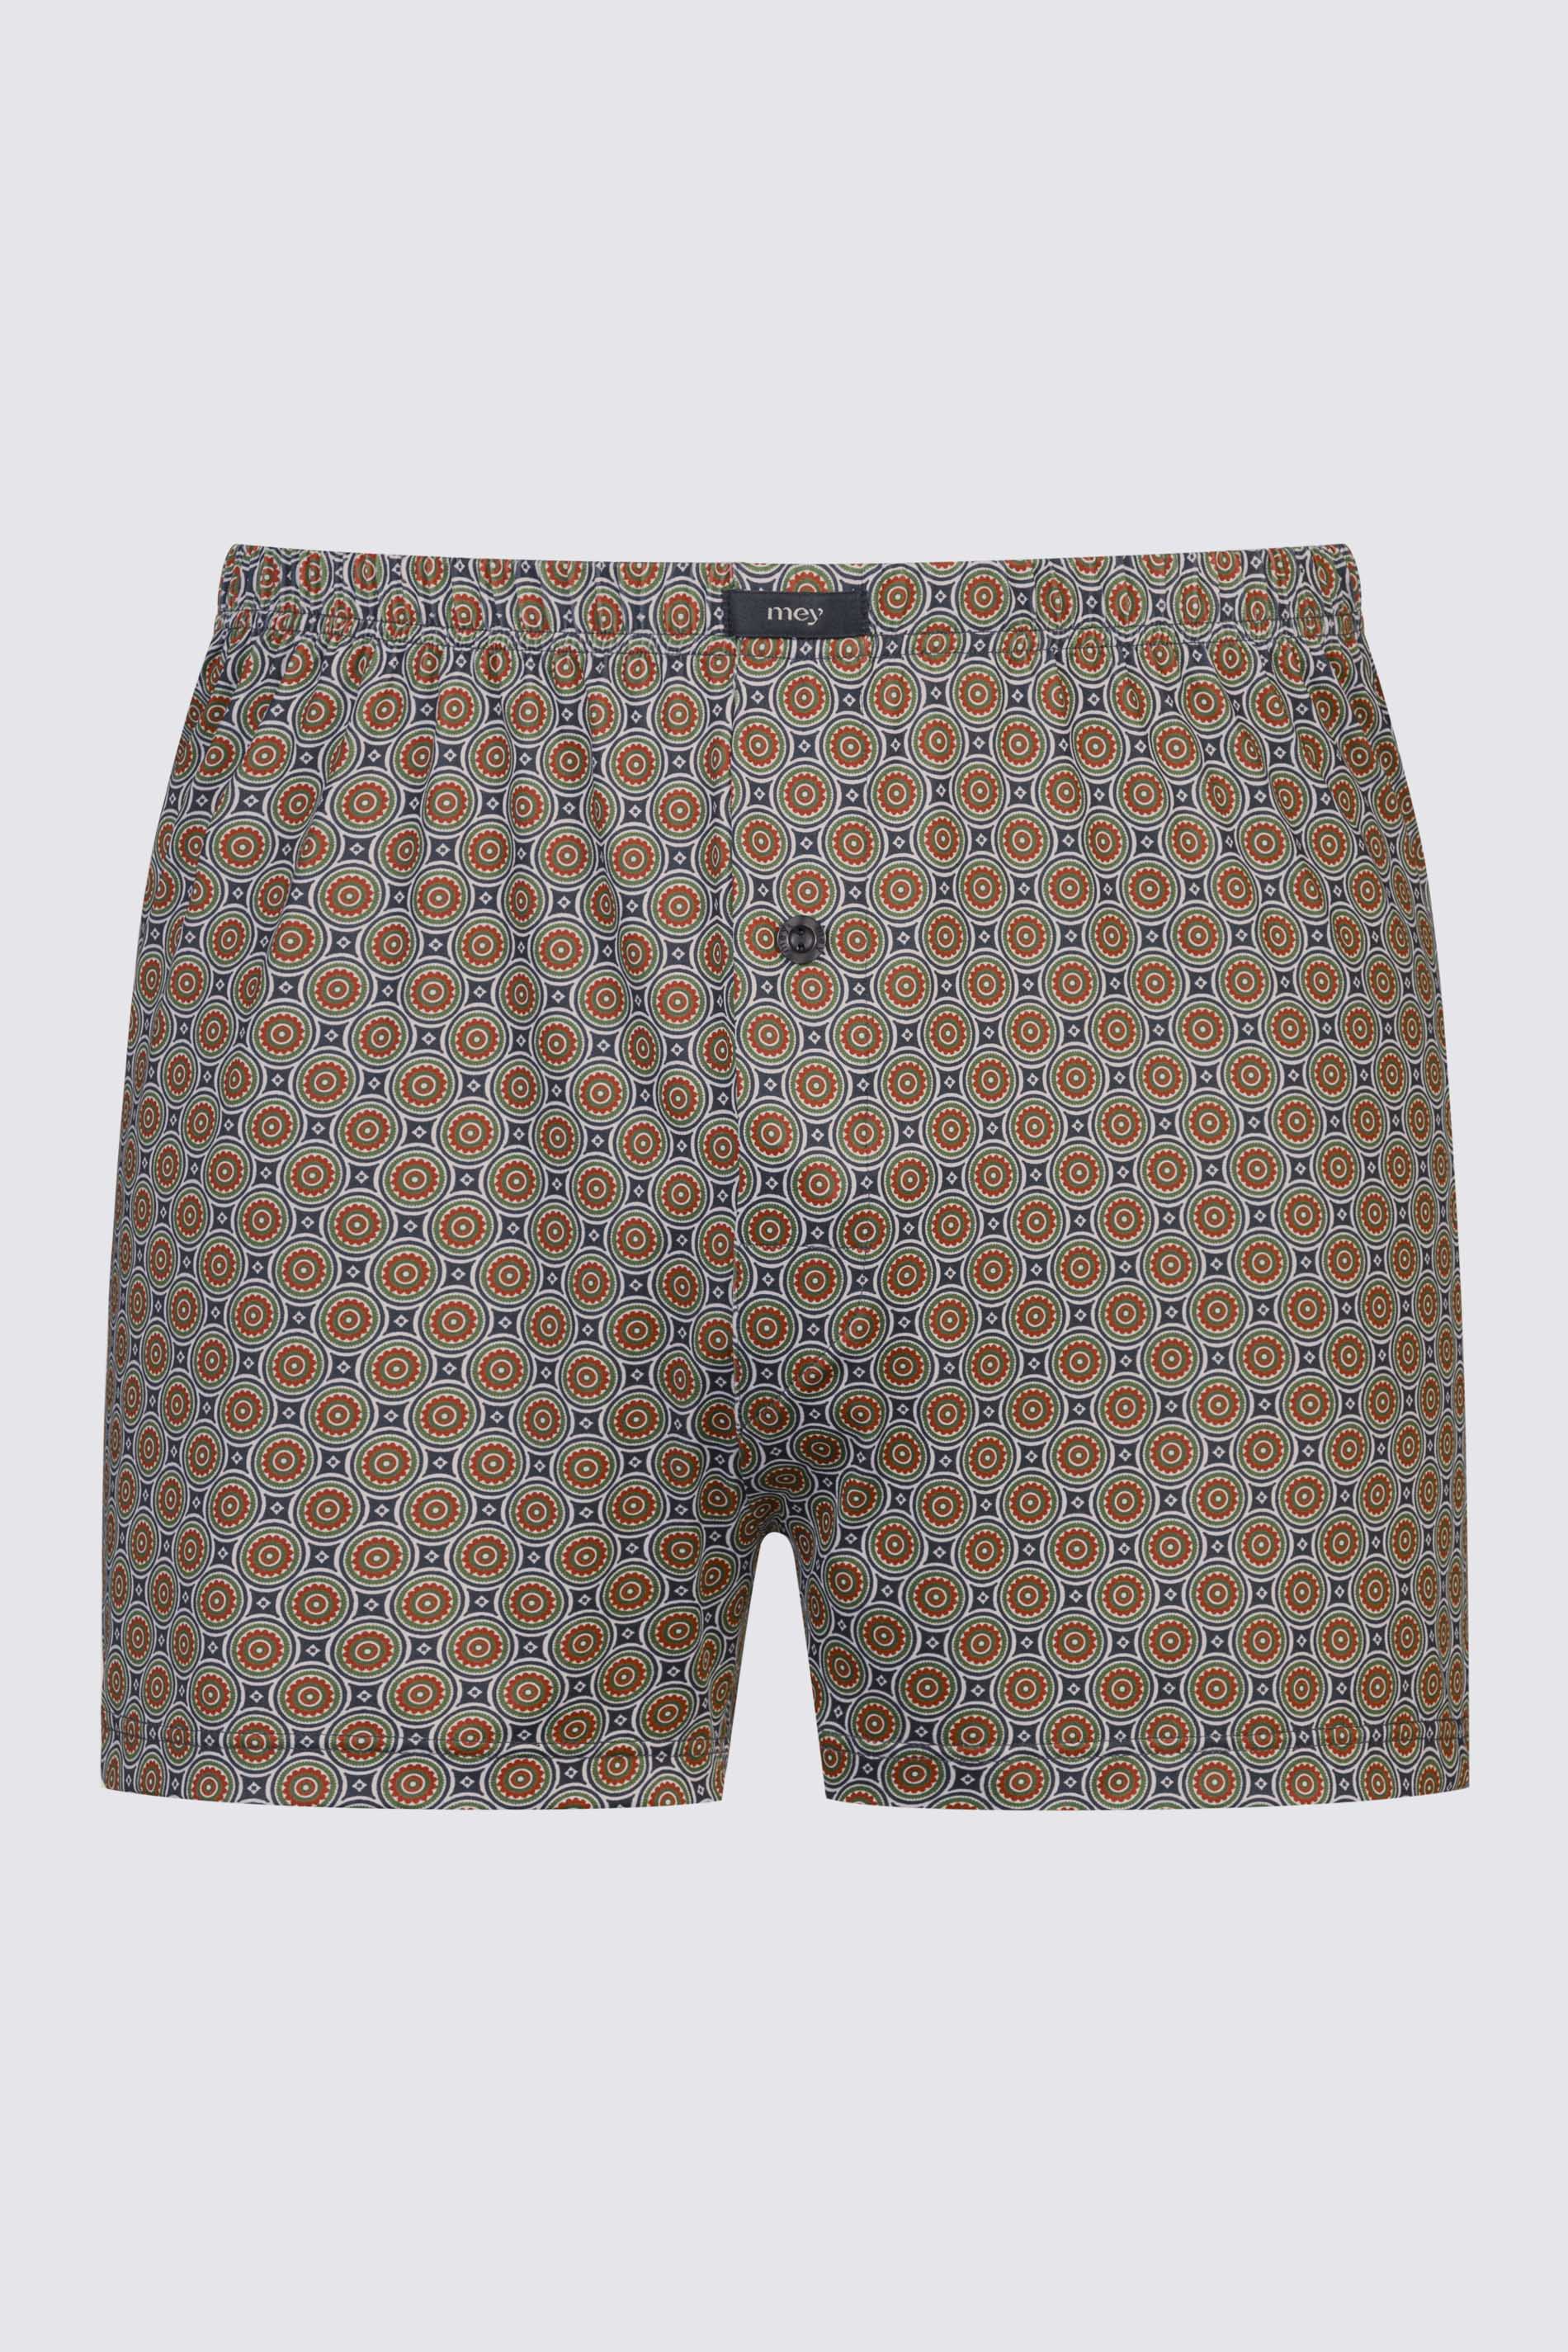 Boxershorts Serie Circles Uitknippen | mey®